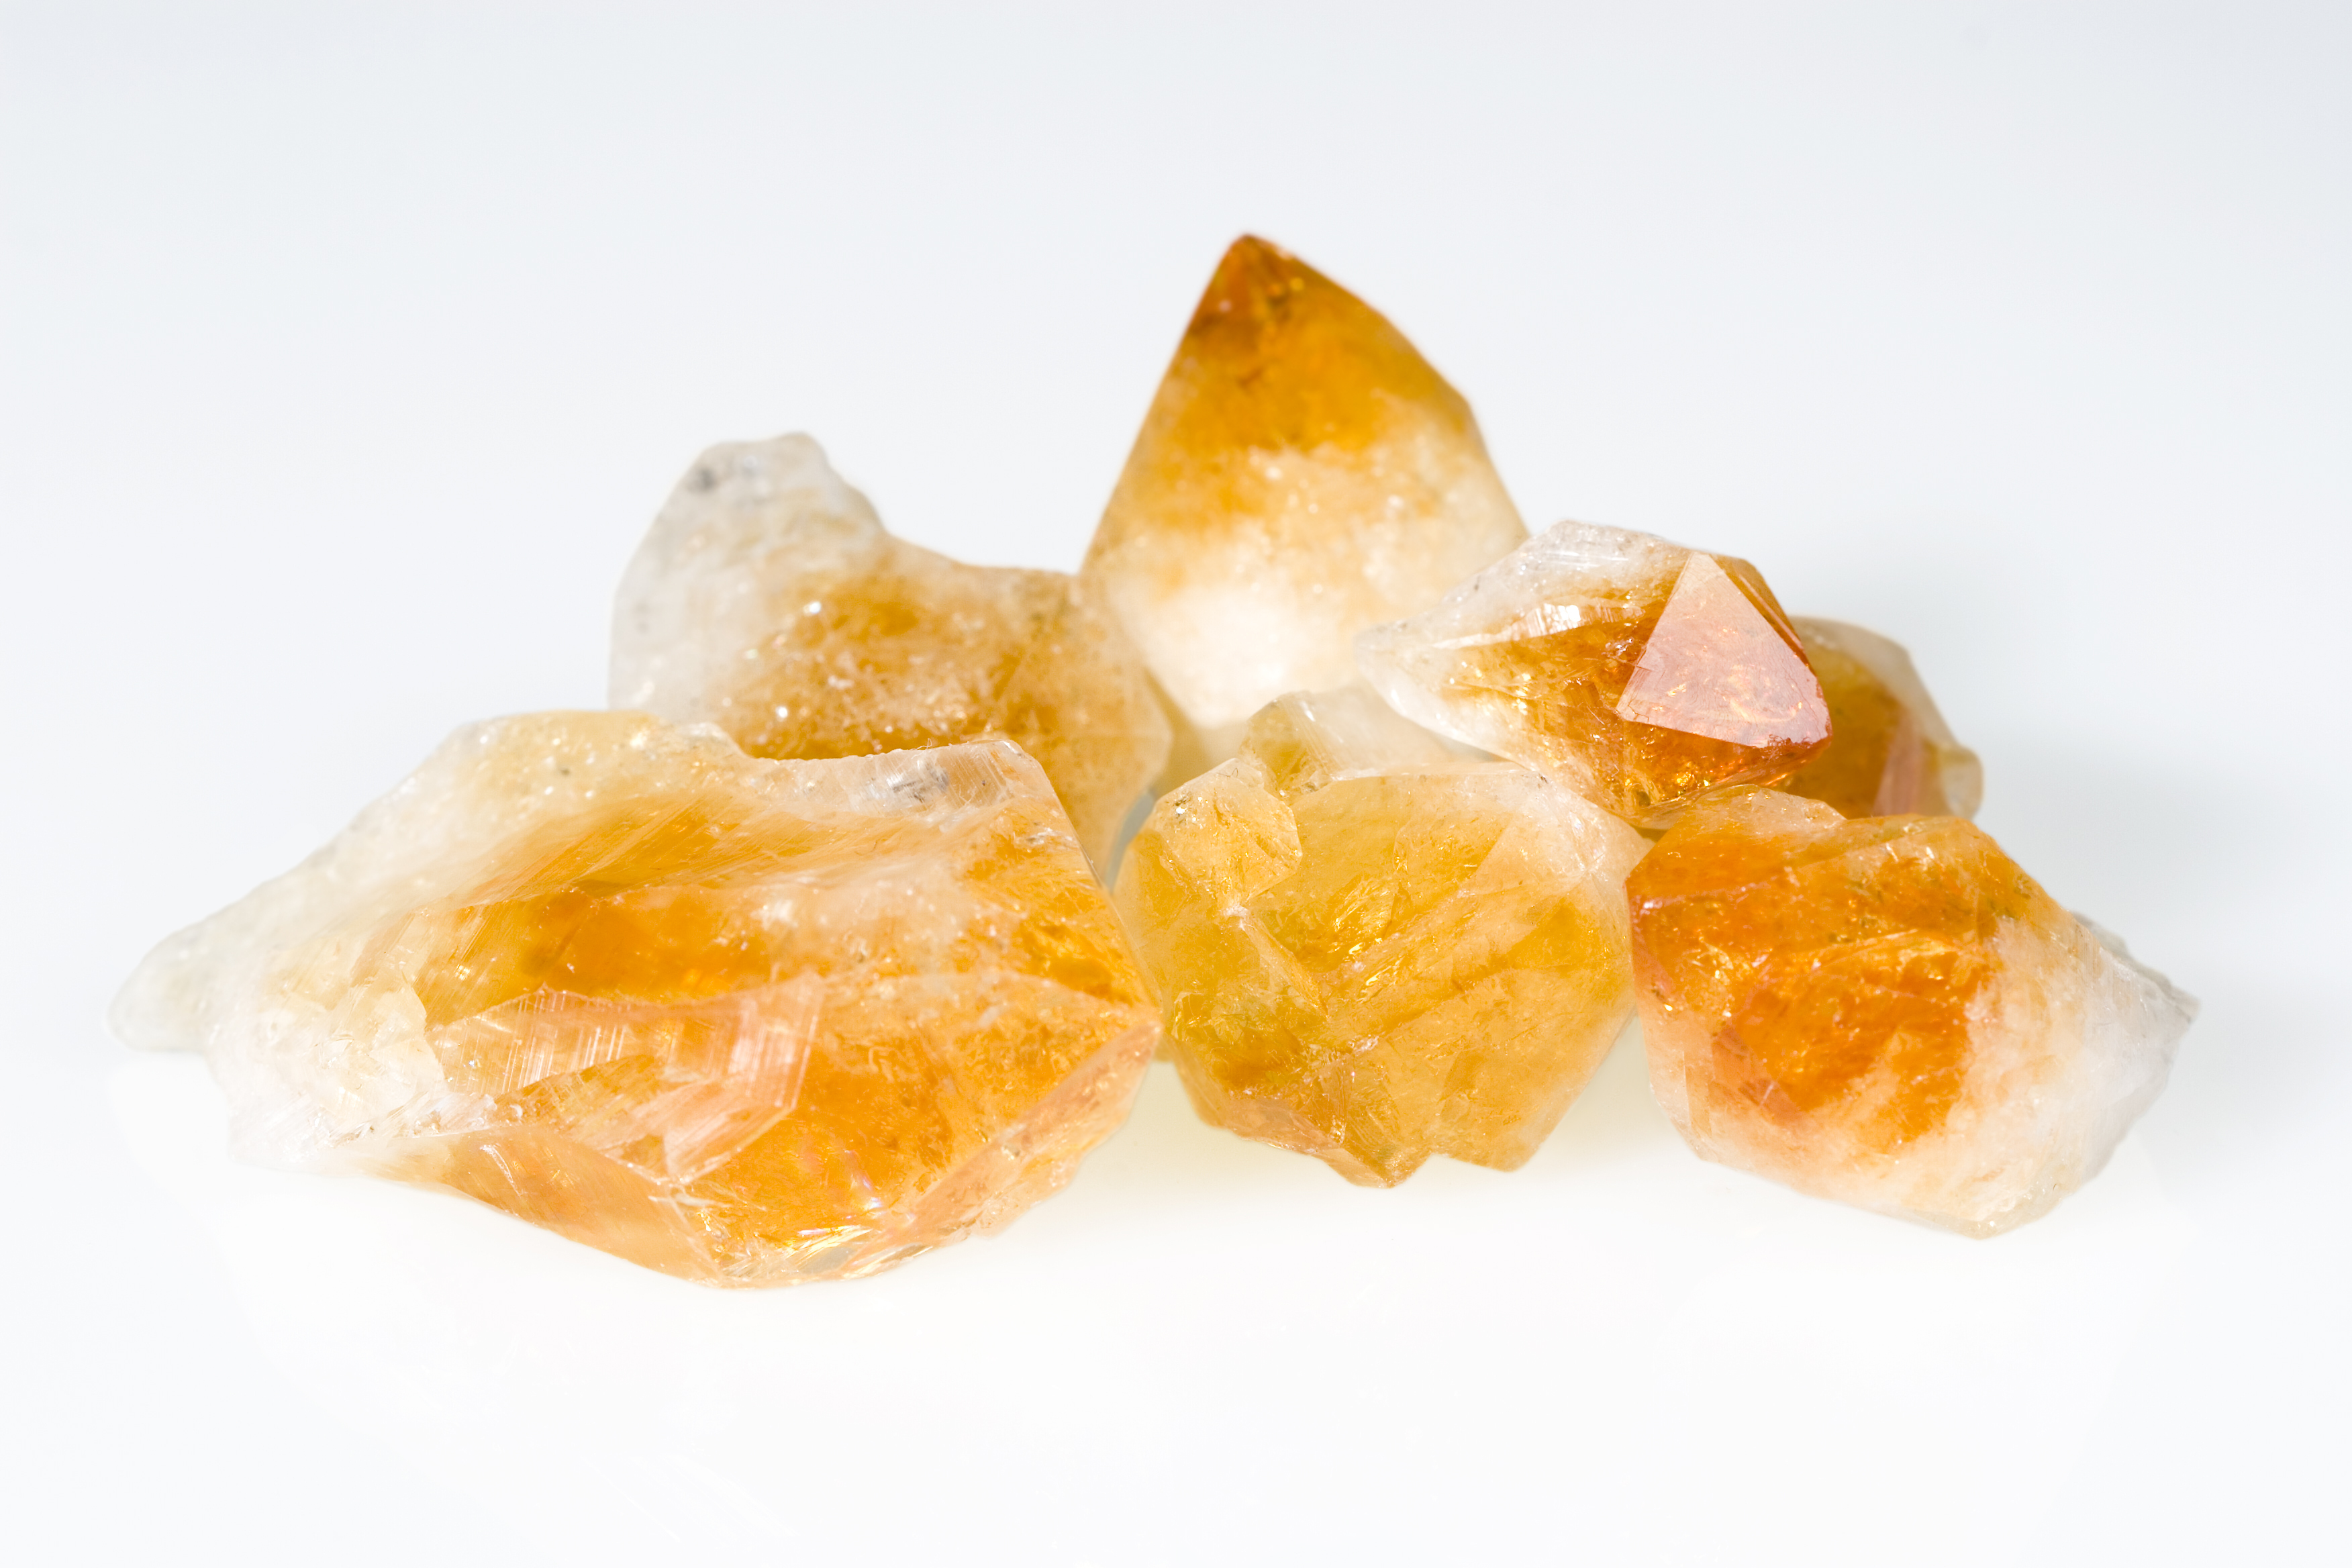 Multiple pieces of Citrine on a white background